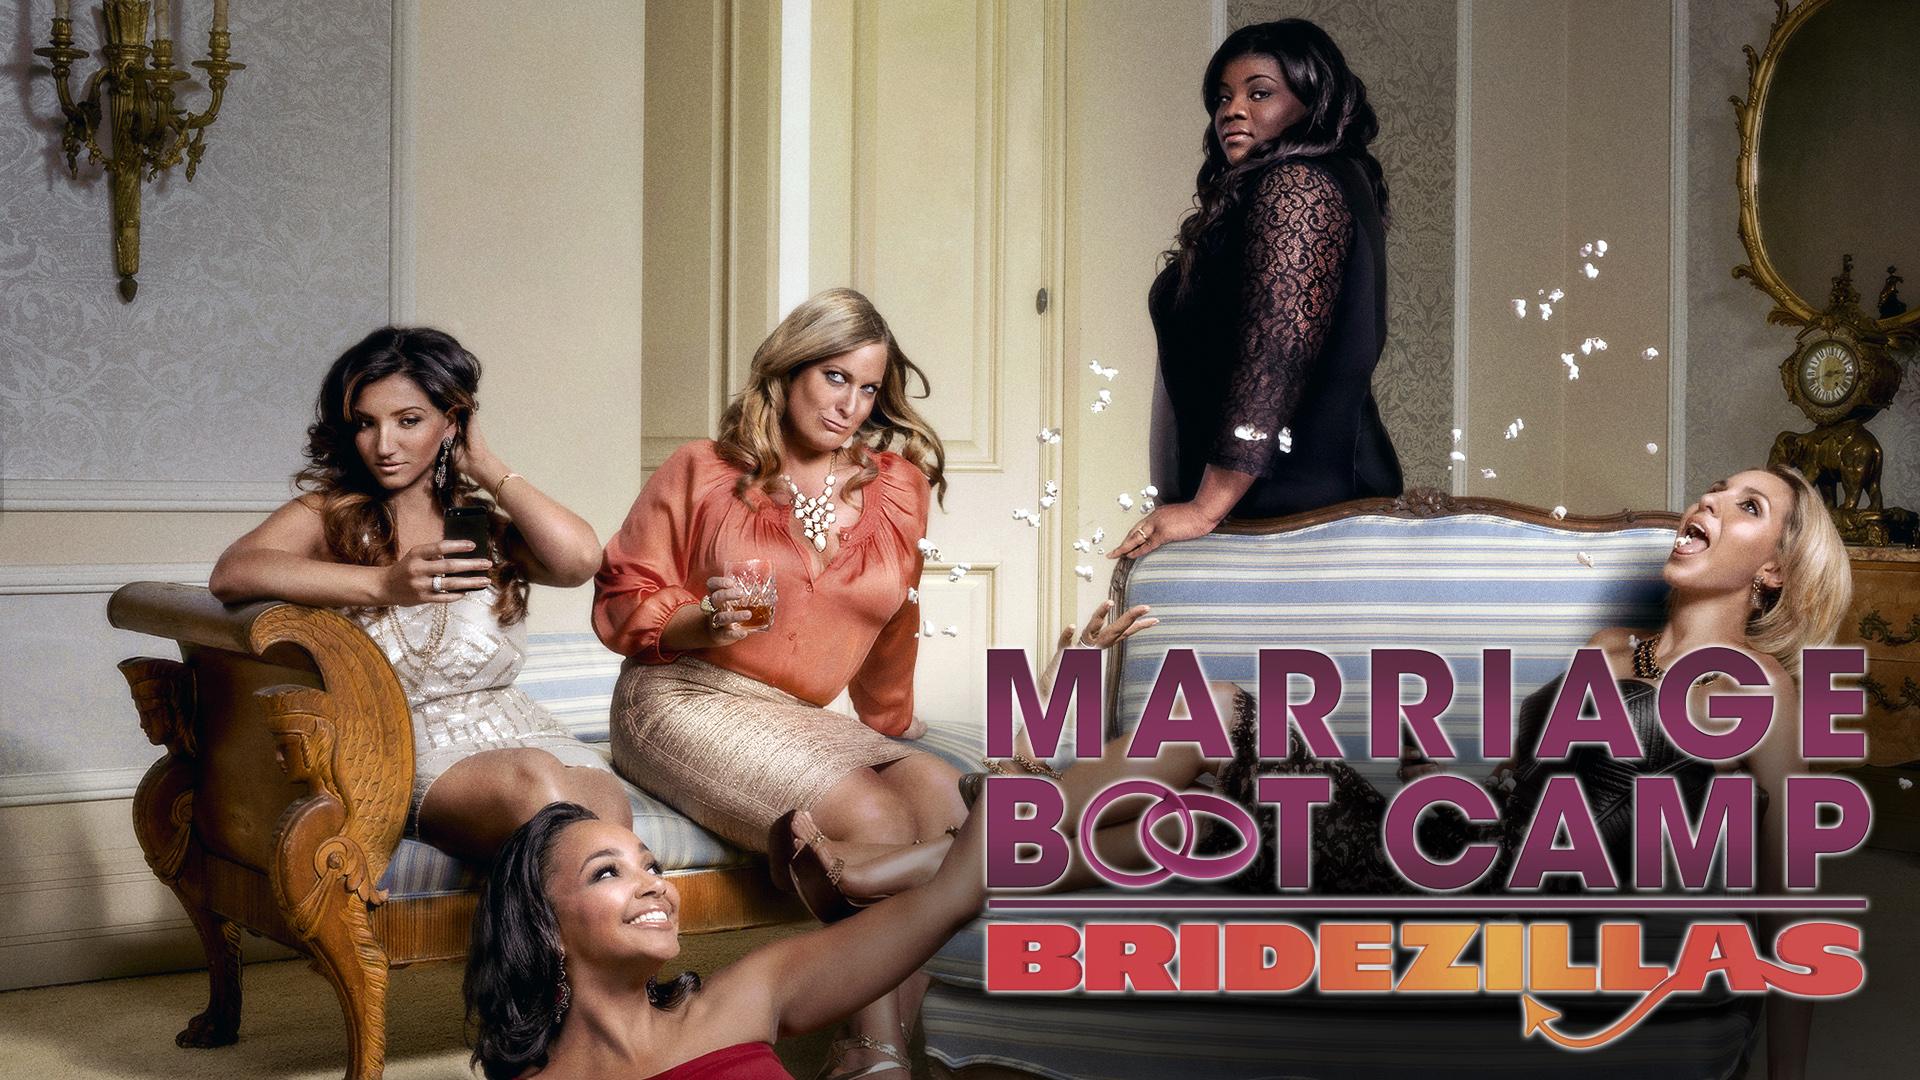 Watch Marriage Boot Camp Bridezillas Streaming Online On Philo Free Trial